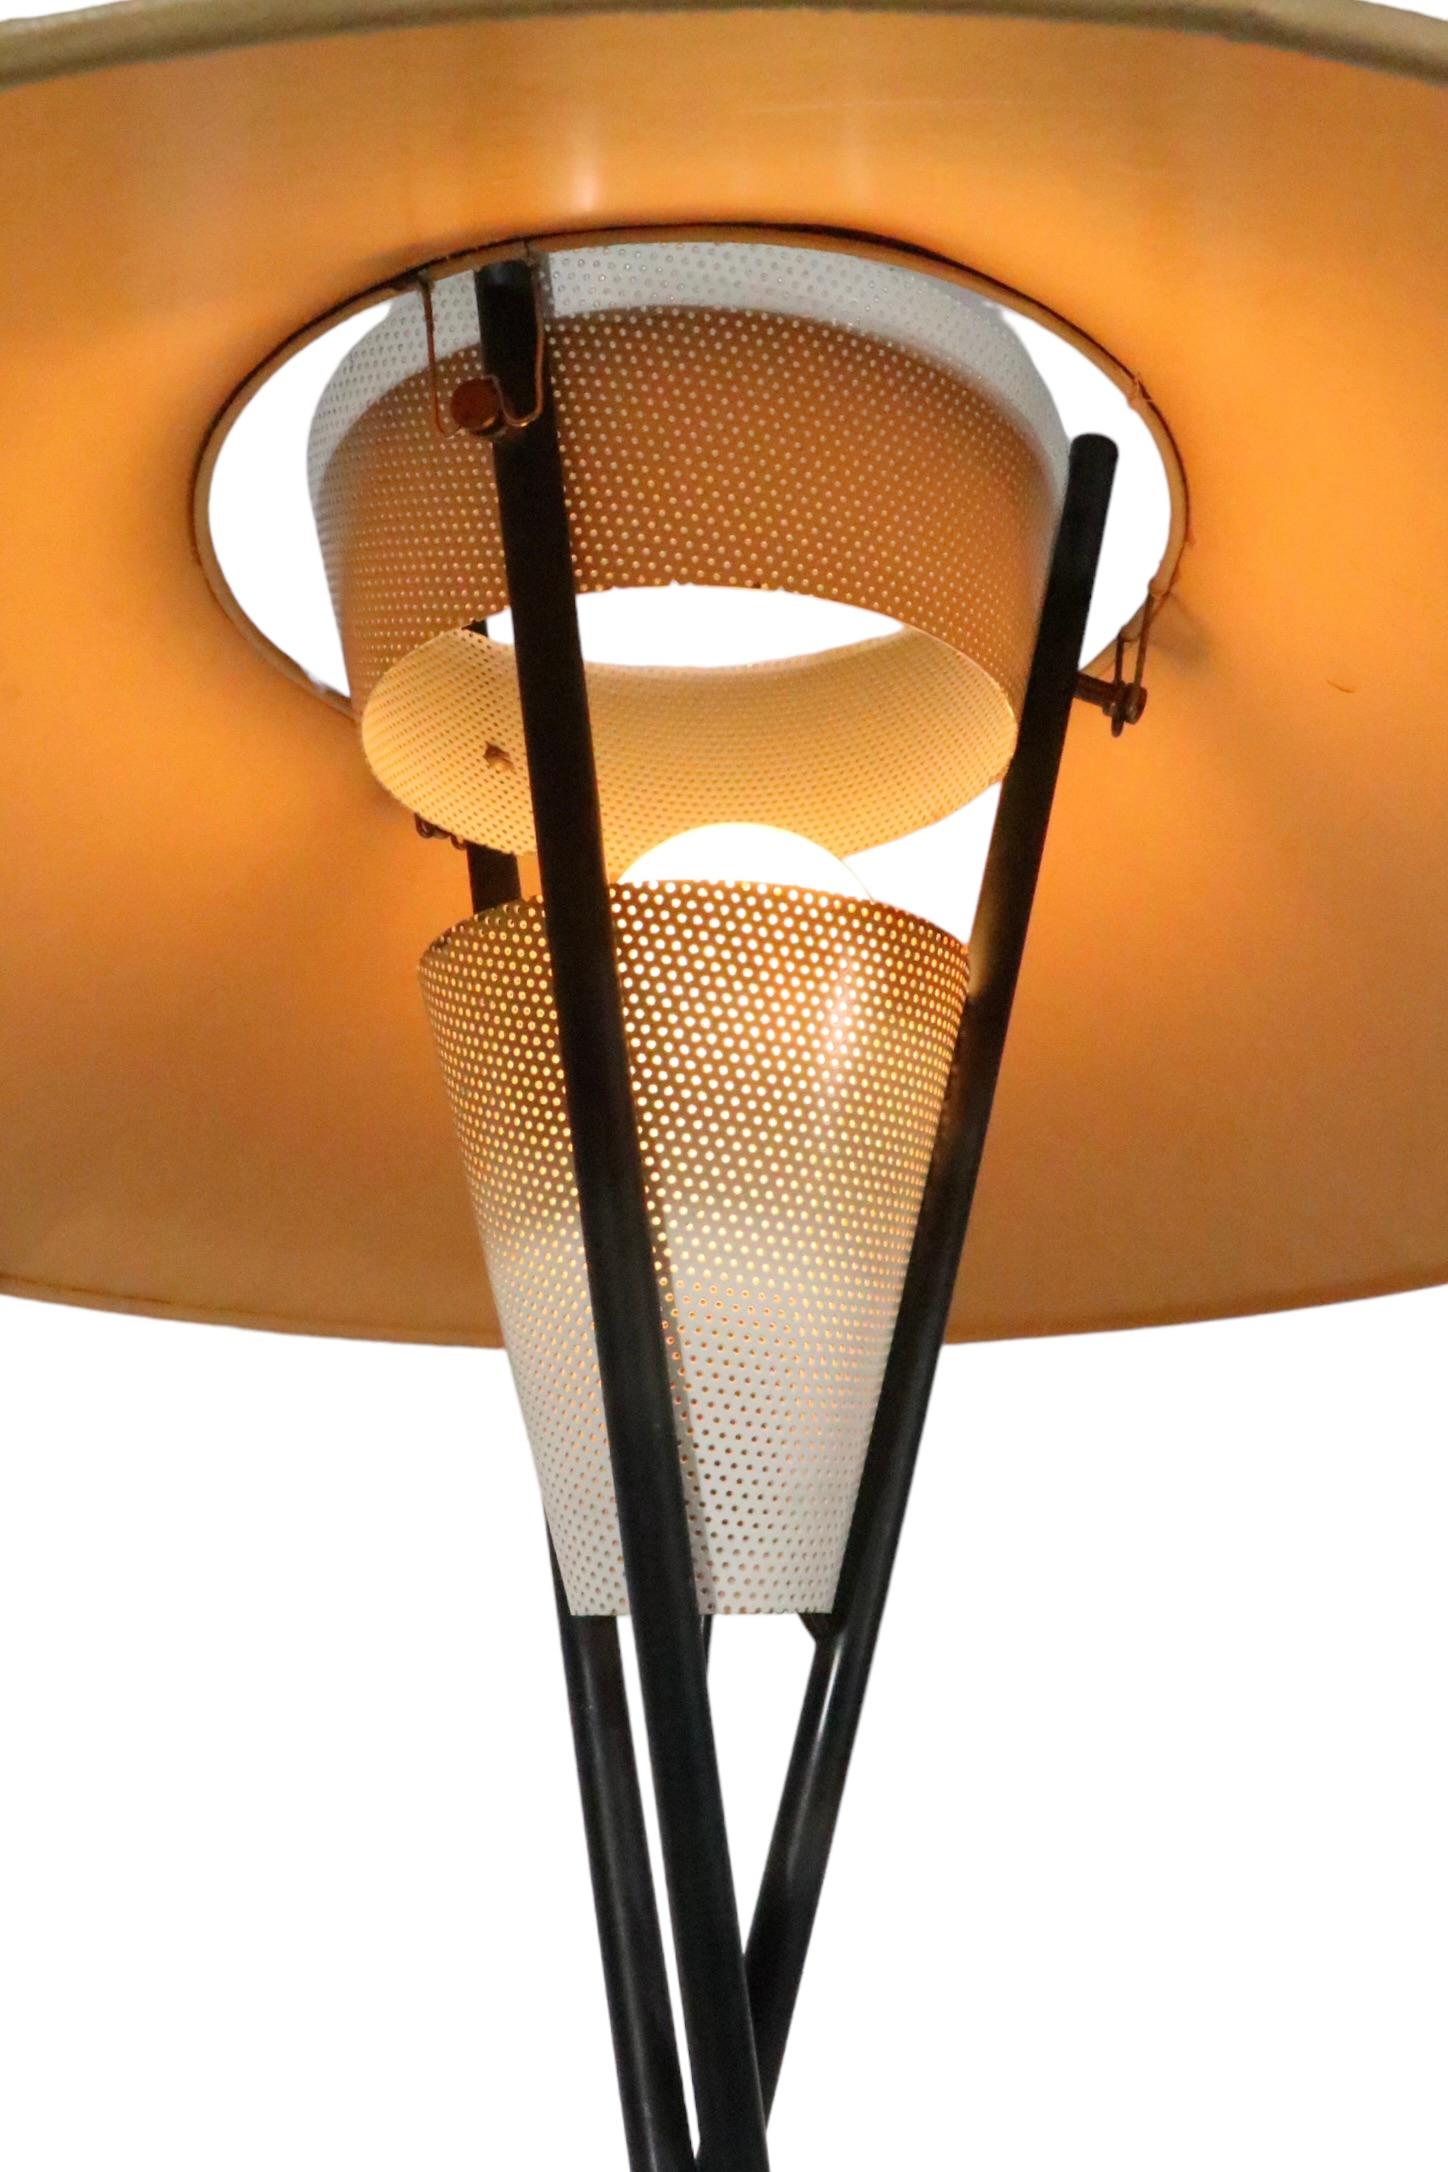 Midcentury Tri Pod Table Lamp by Gerald Thurston for Lightolier C 1950s For Sale 3